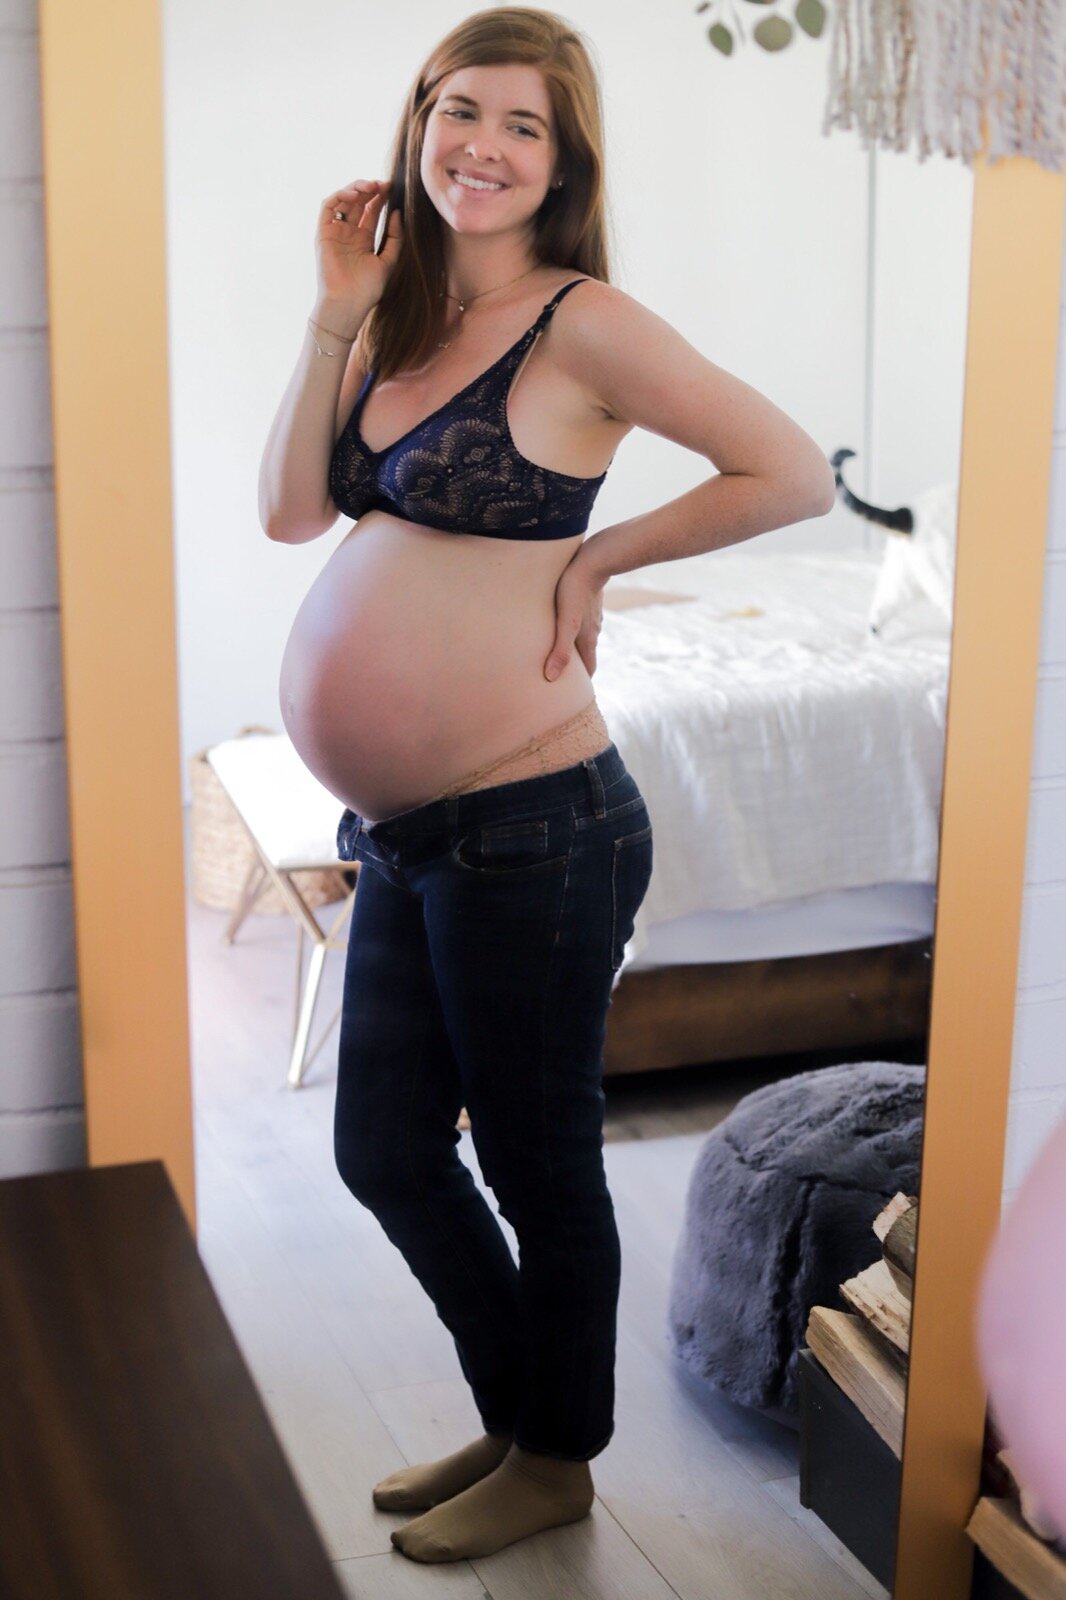 Second Trimester with Twins, LMents of Style